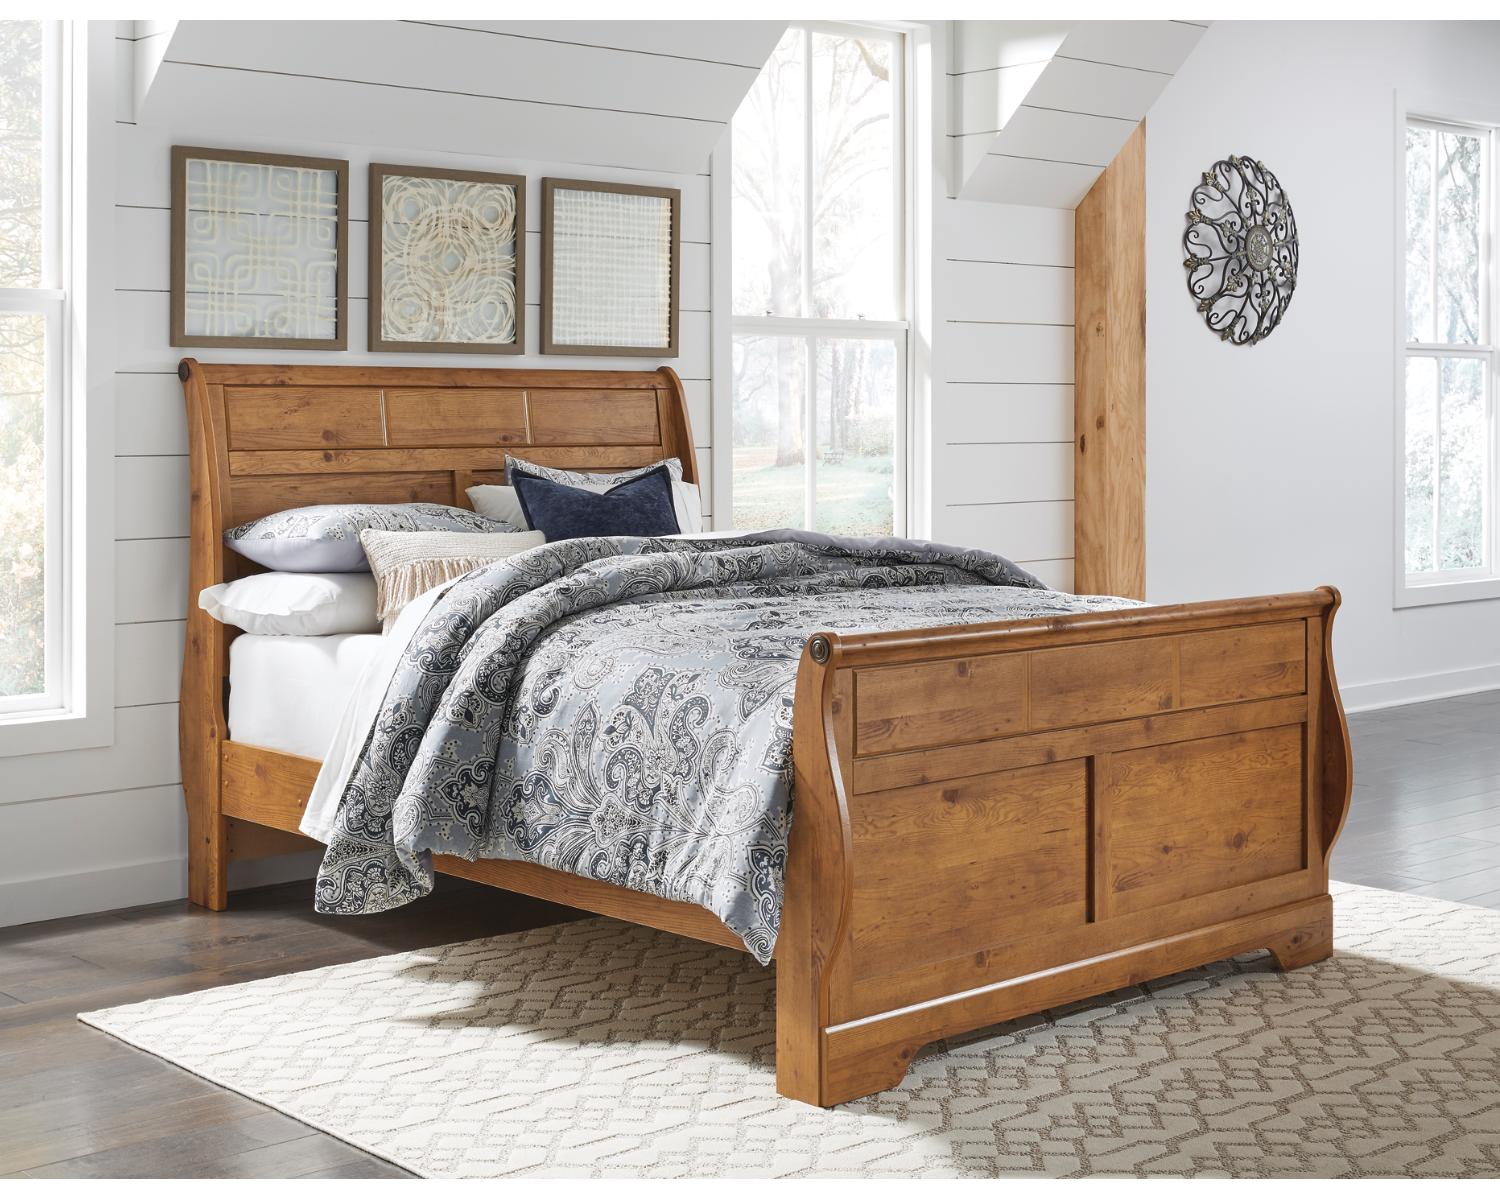 Signature Design by Ashley Bittersweet Light Brown Pine Grain Finish Queen Sleigh Headboard - image 1 of 5